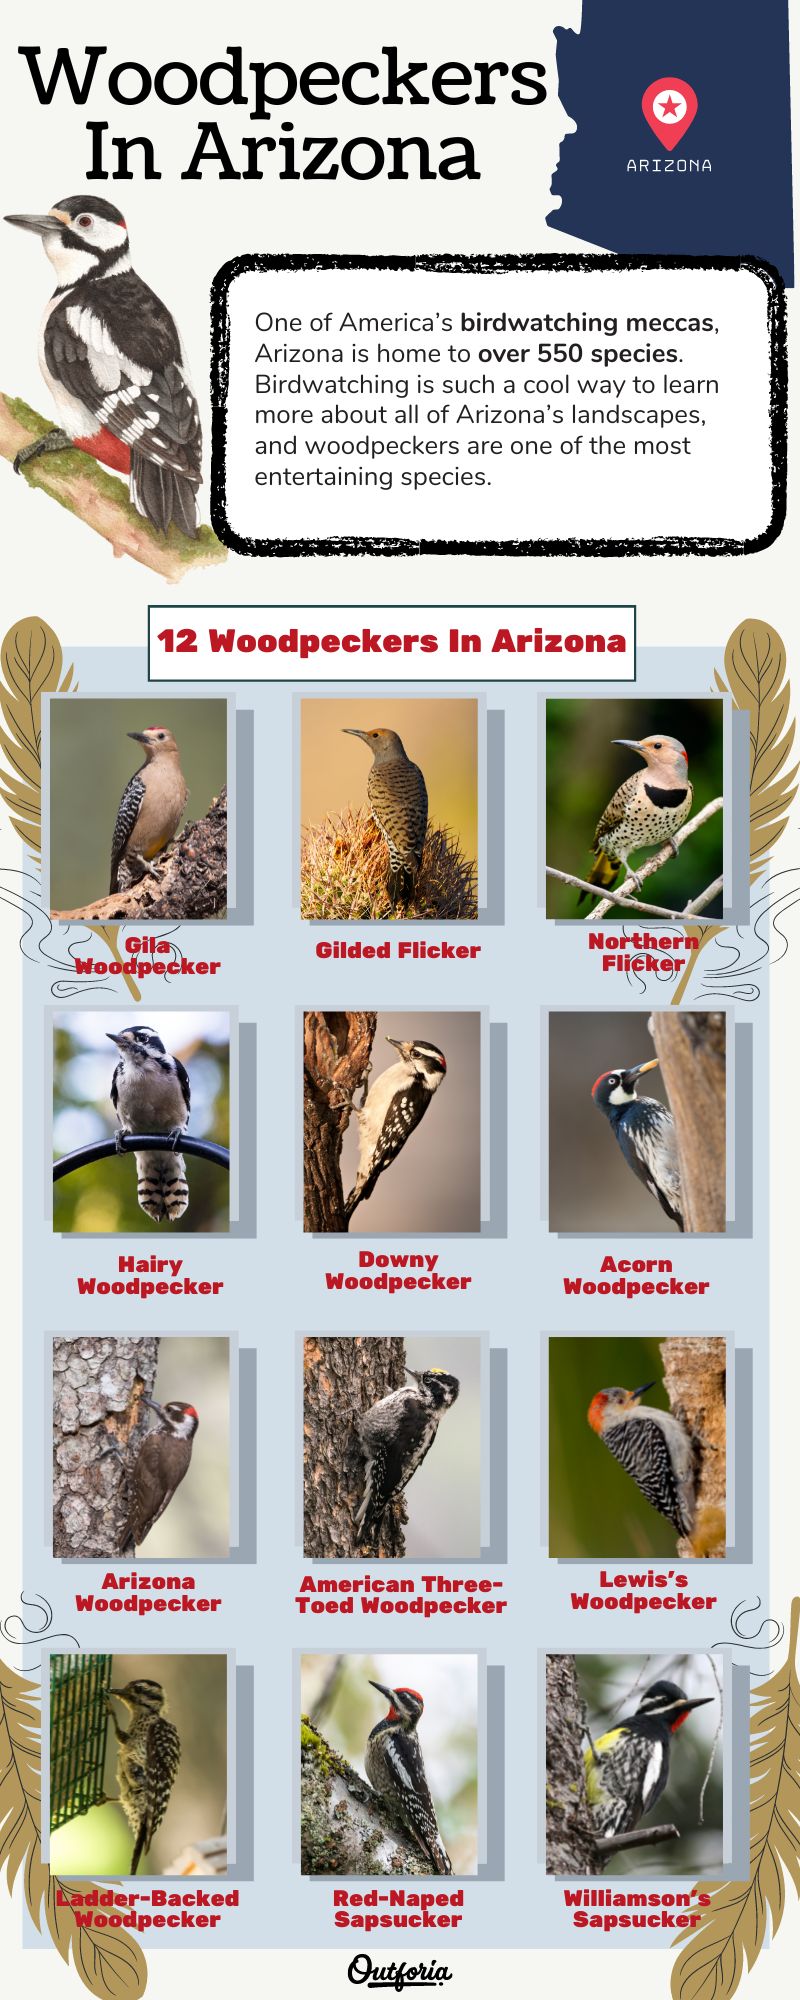 Chart of different woodpeckers in arizona complete with pictures, facts, and more